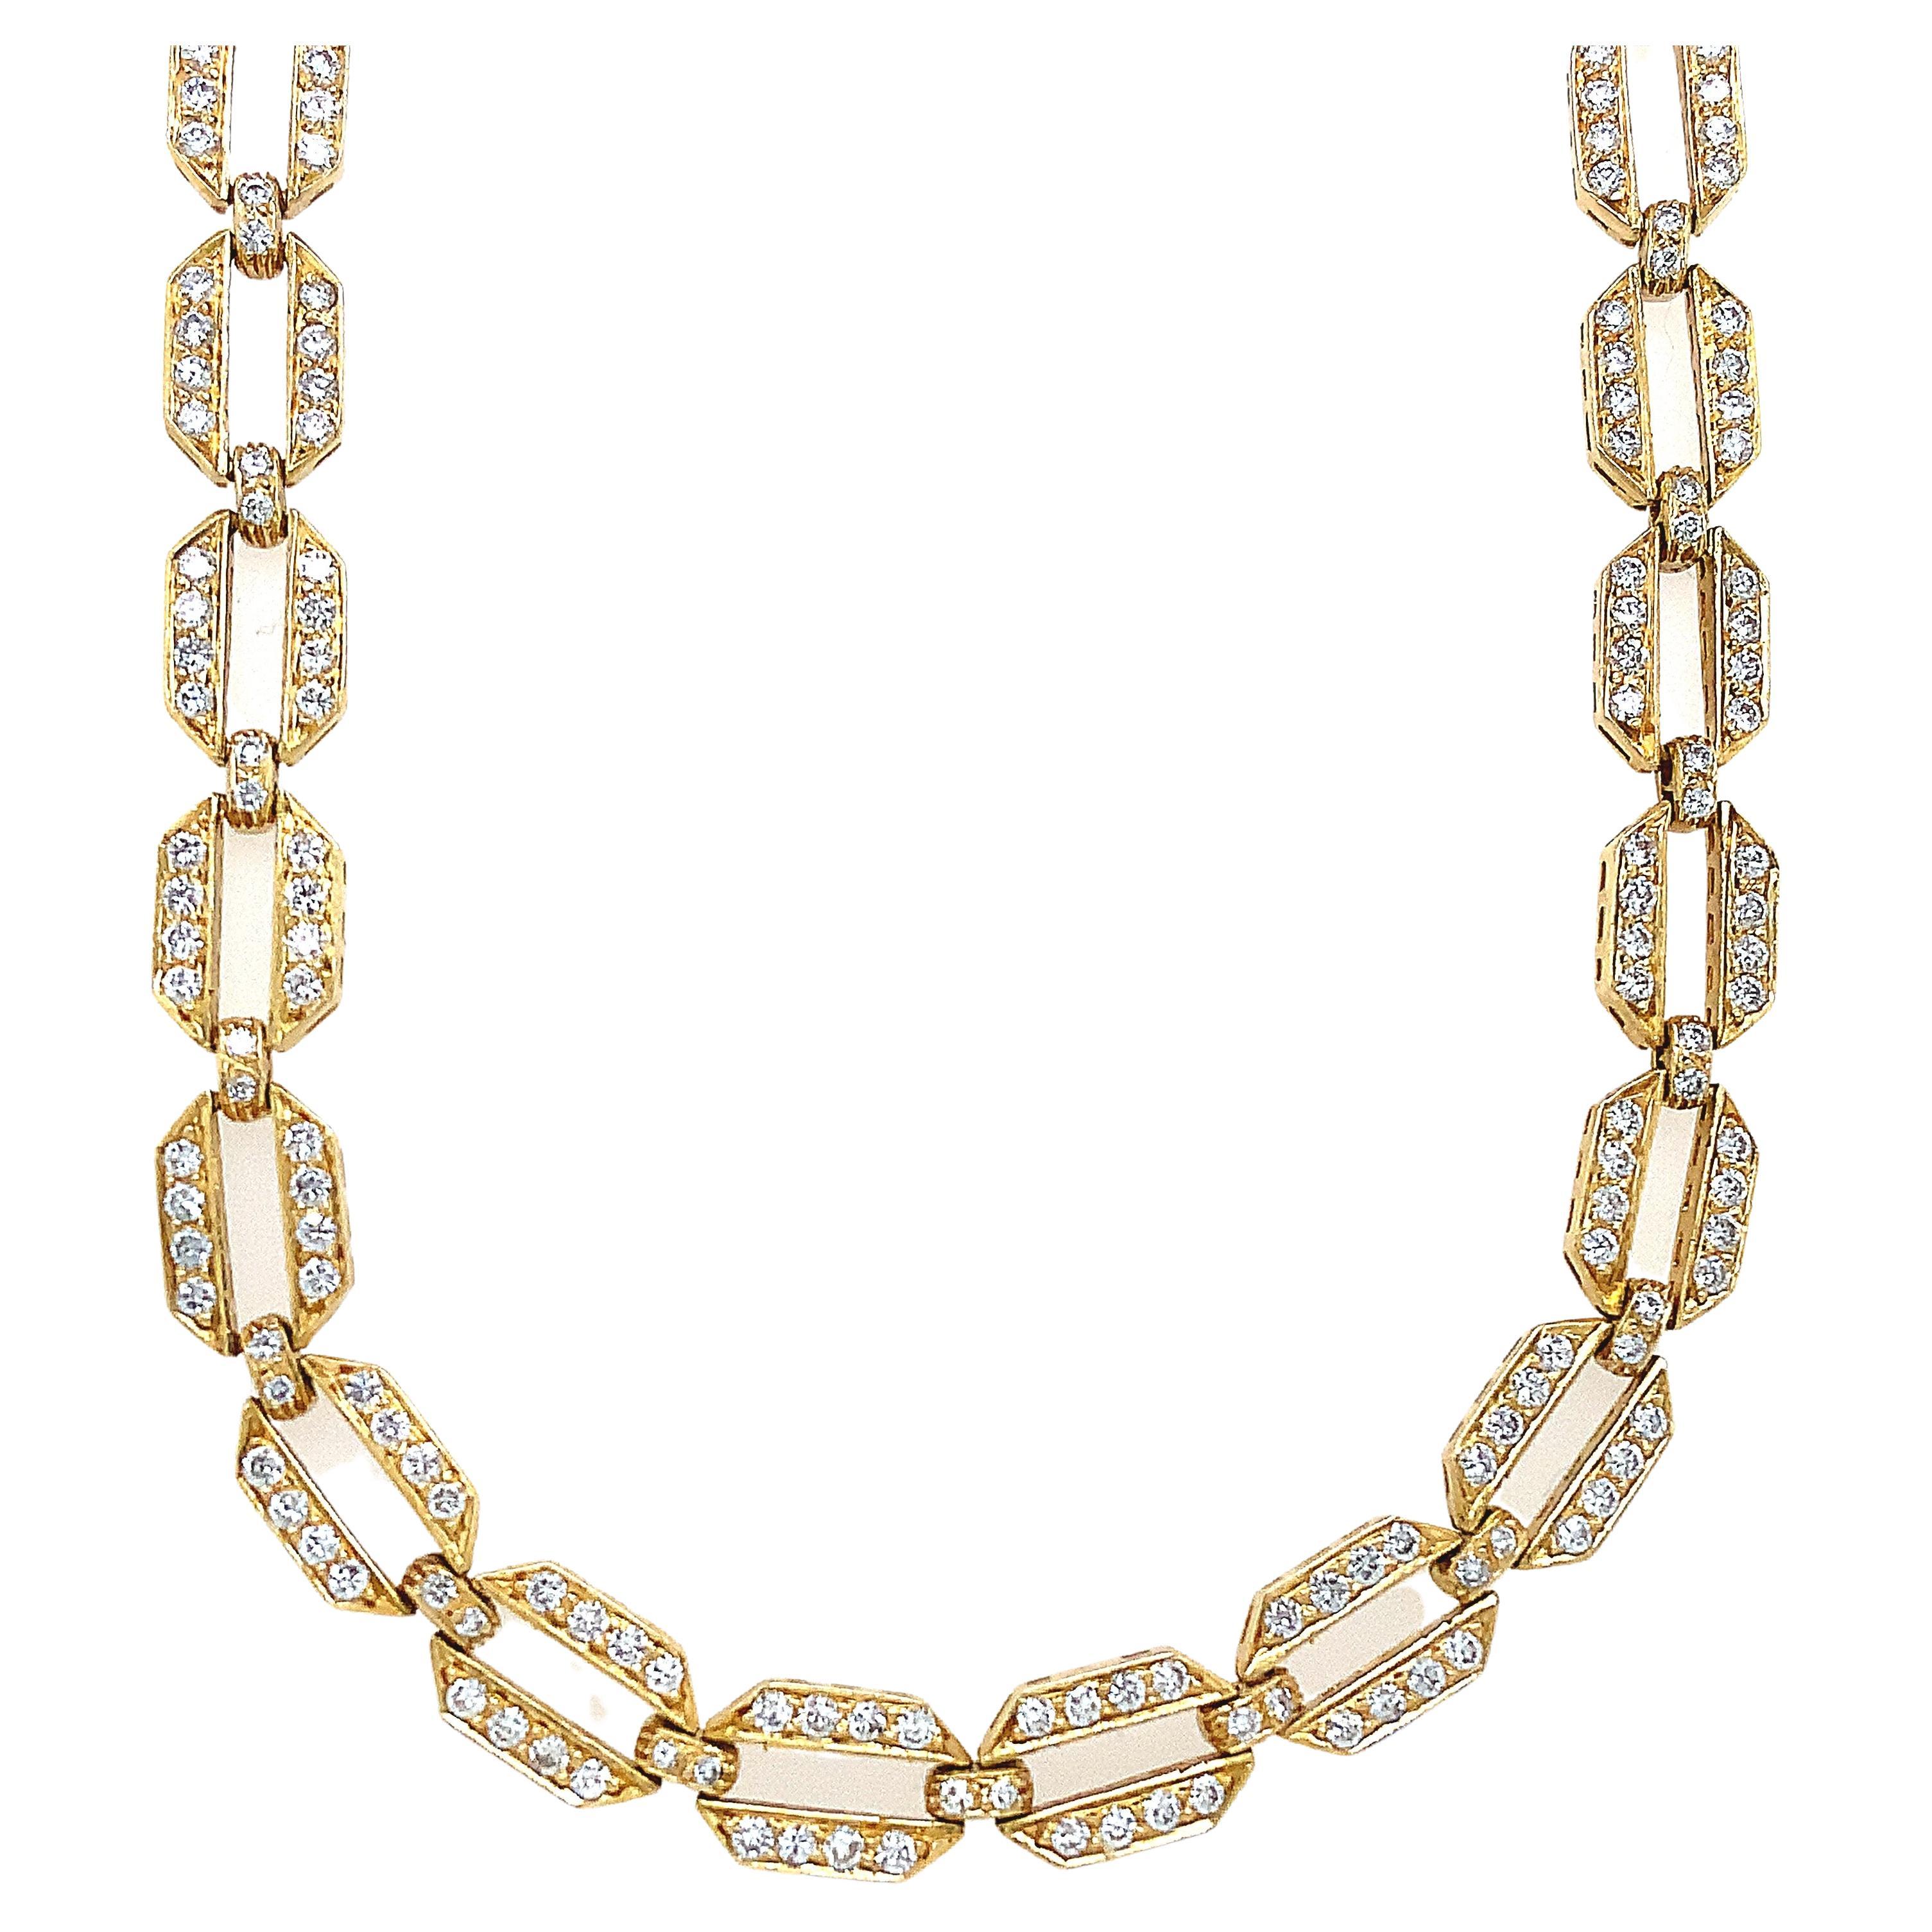 Important One of a Kind Vintage Diamond Link Necklace set in 18k Yellow Gold For Sale